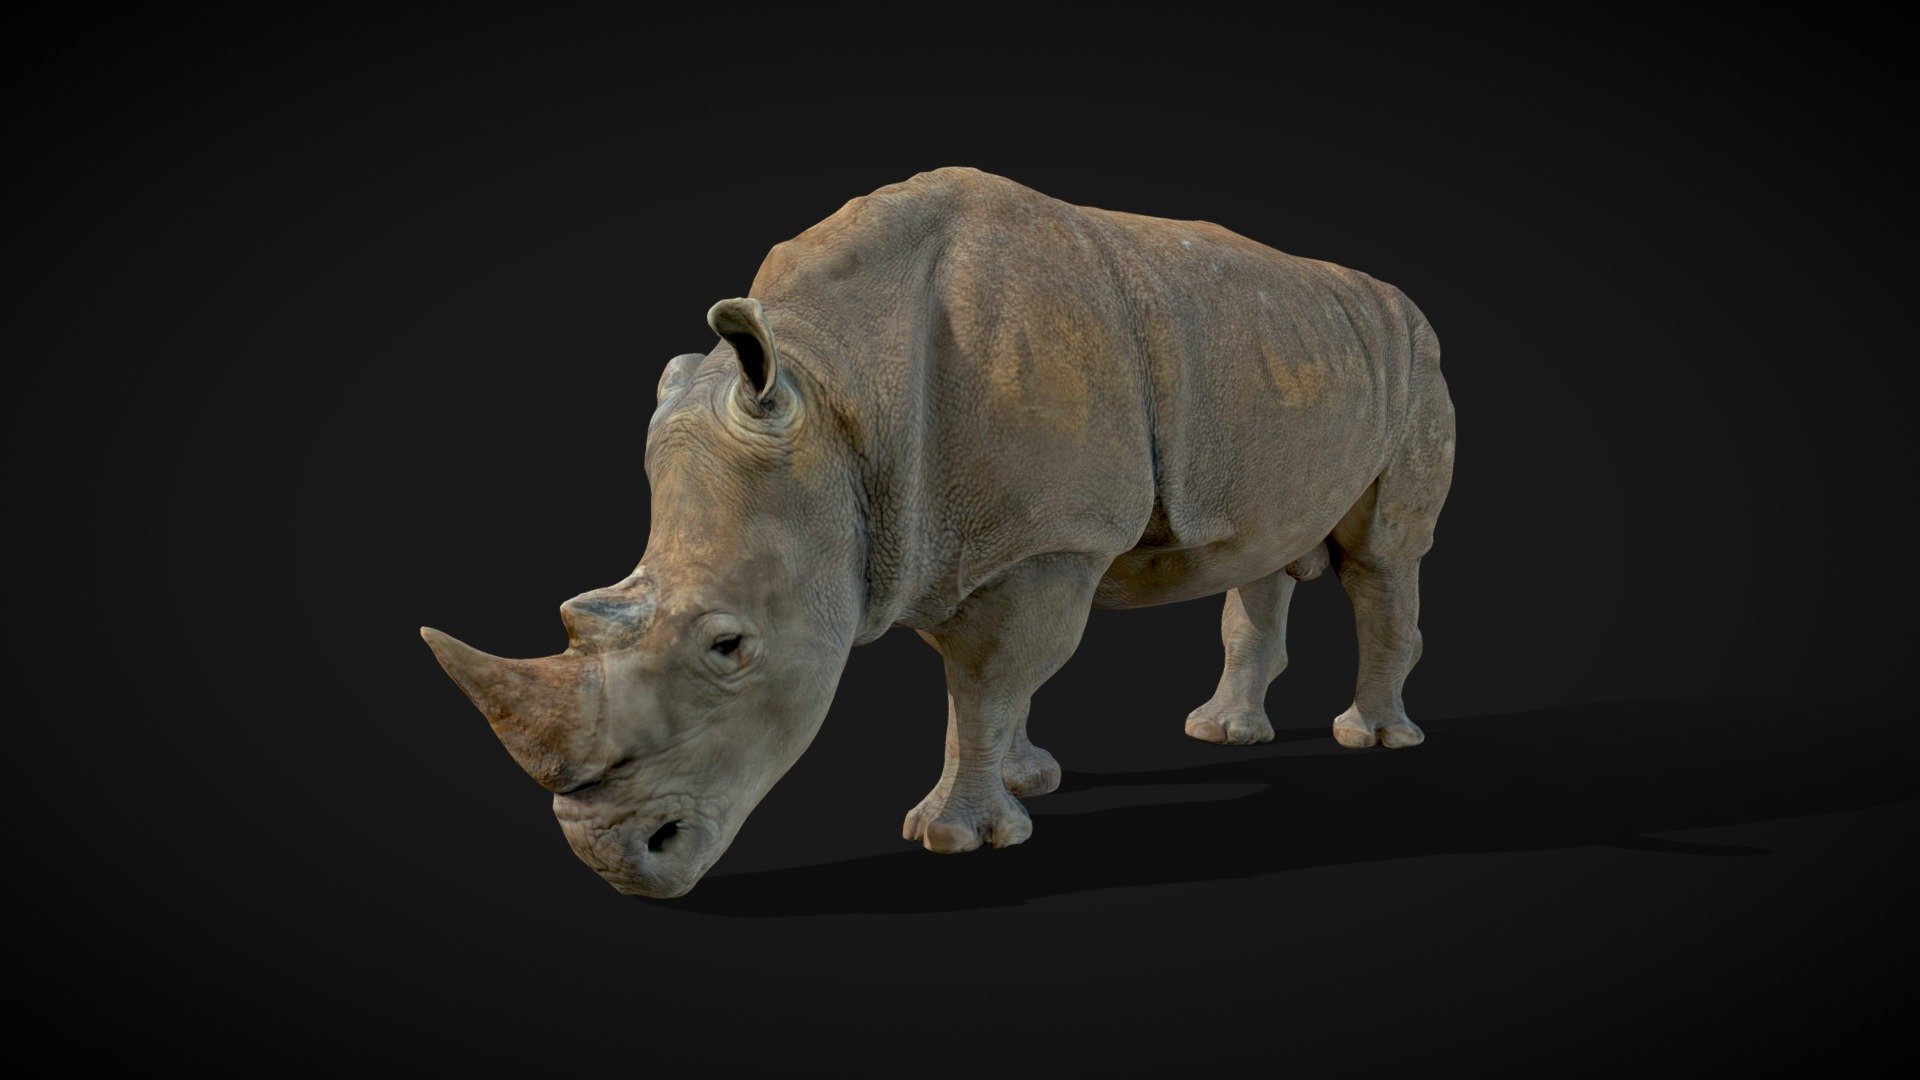 This is a 3D model of Bakari, a Southern Right Rhino (Ceratotherium simum) from Perth Zoo, Western Australia, which was initially scanned using an array of 20 Canon G16 cameras.  CG artist Jer Bot used the open source 3D animation software Blender (blender.org) to fully reconstruct the rhino. The mass of the Rhino is 2225 kg and its length is 2.1 meters. Reference photos were also used as a guide to create taxonomic features onto the 3D model using Blender's sculpting tools.

Downloads are freely available for creative and non-profit use. To inquire about licensing, please visit www.digitallife3d.org 3d model